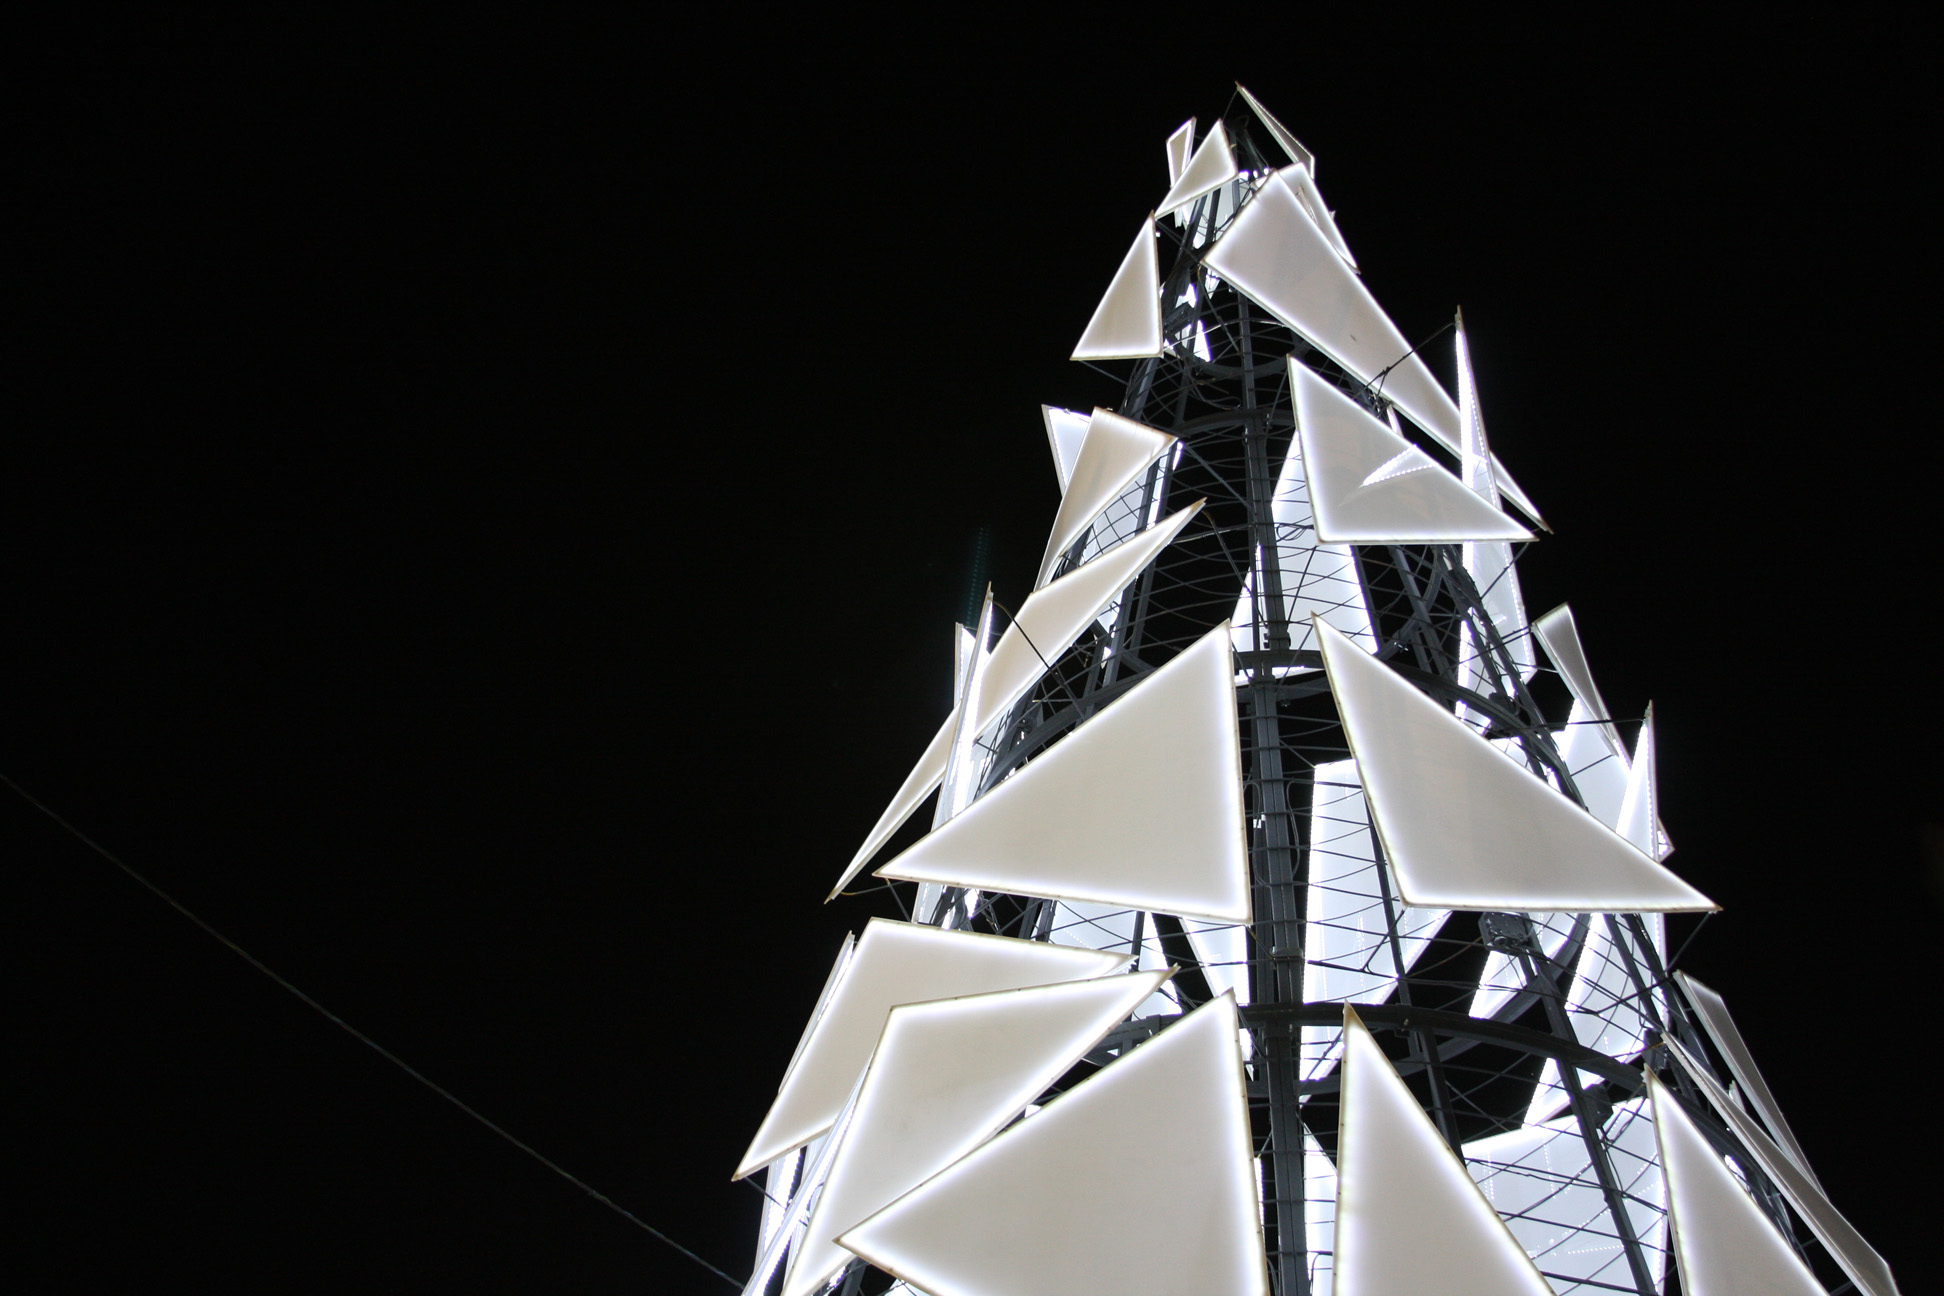 Bright-white triangular lights in the shape of a tree